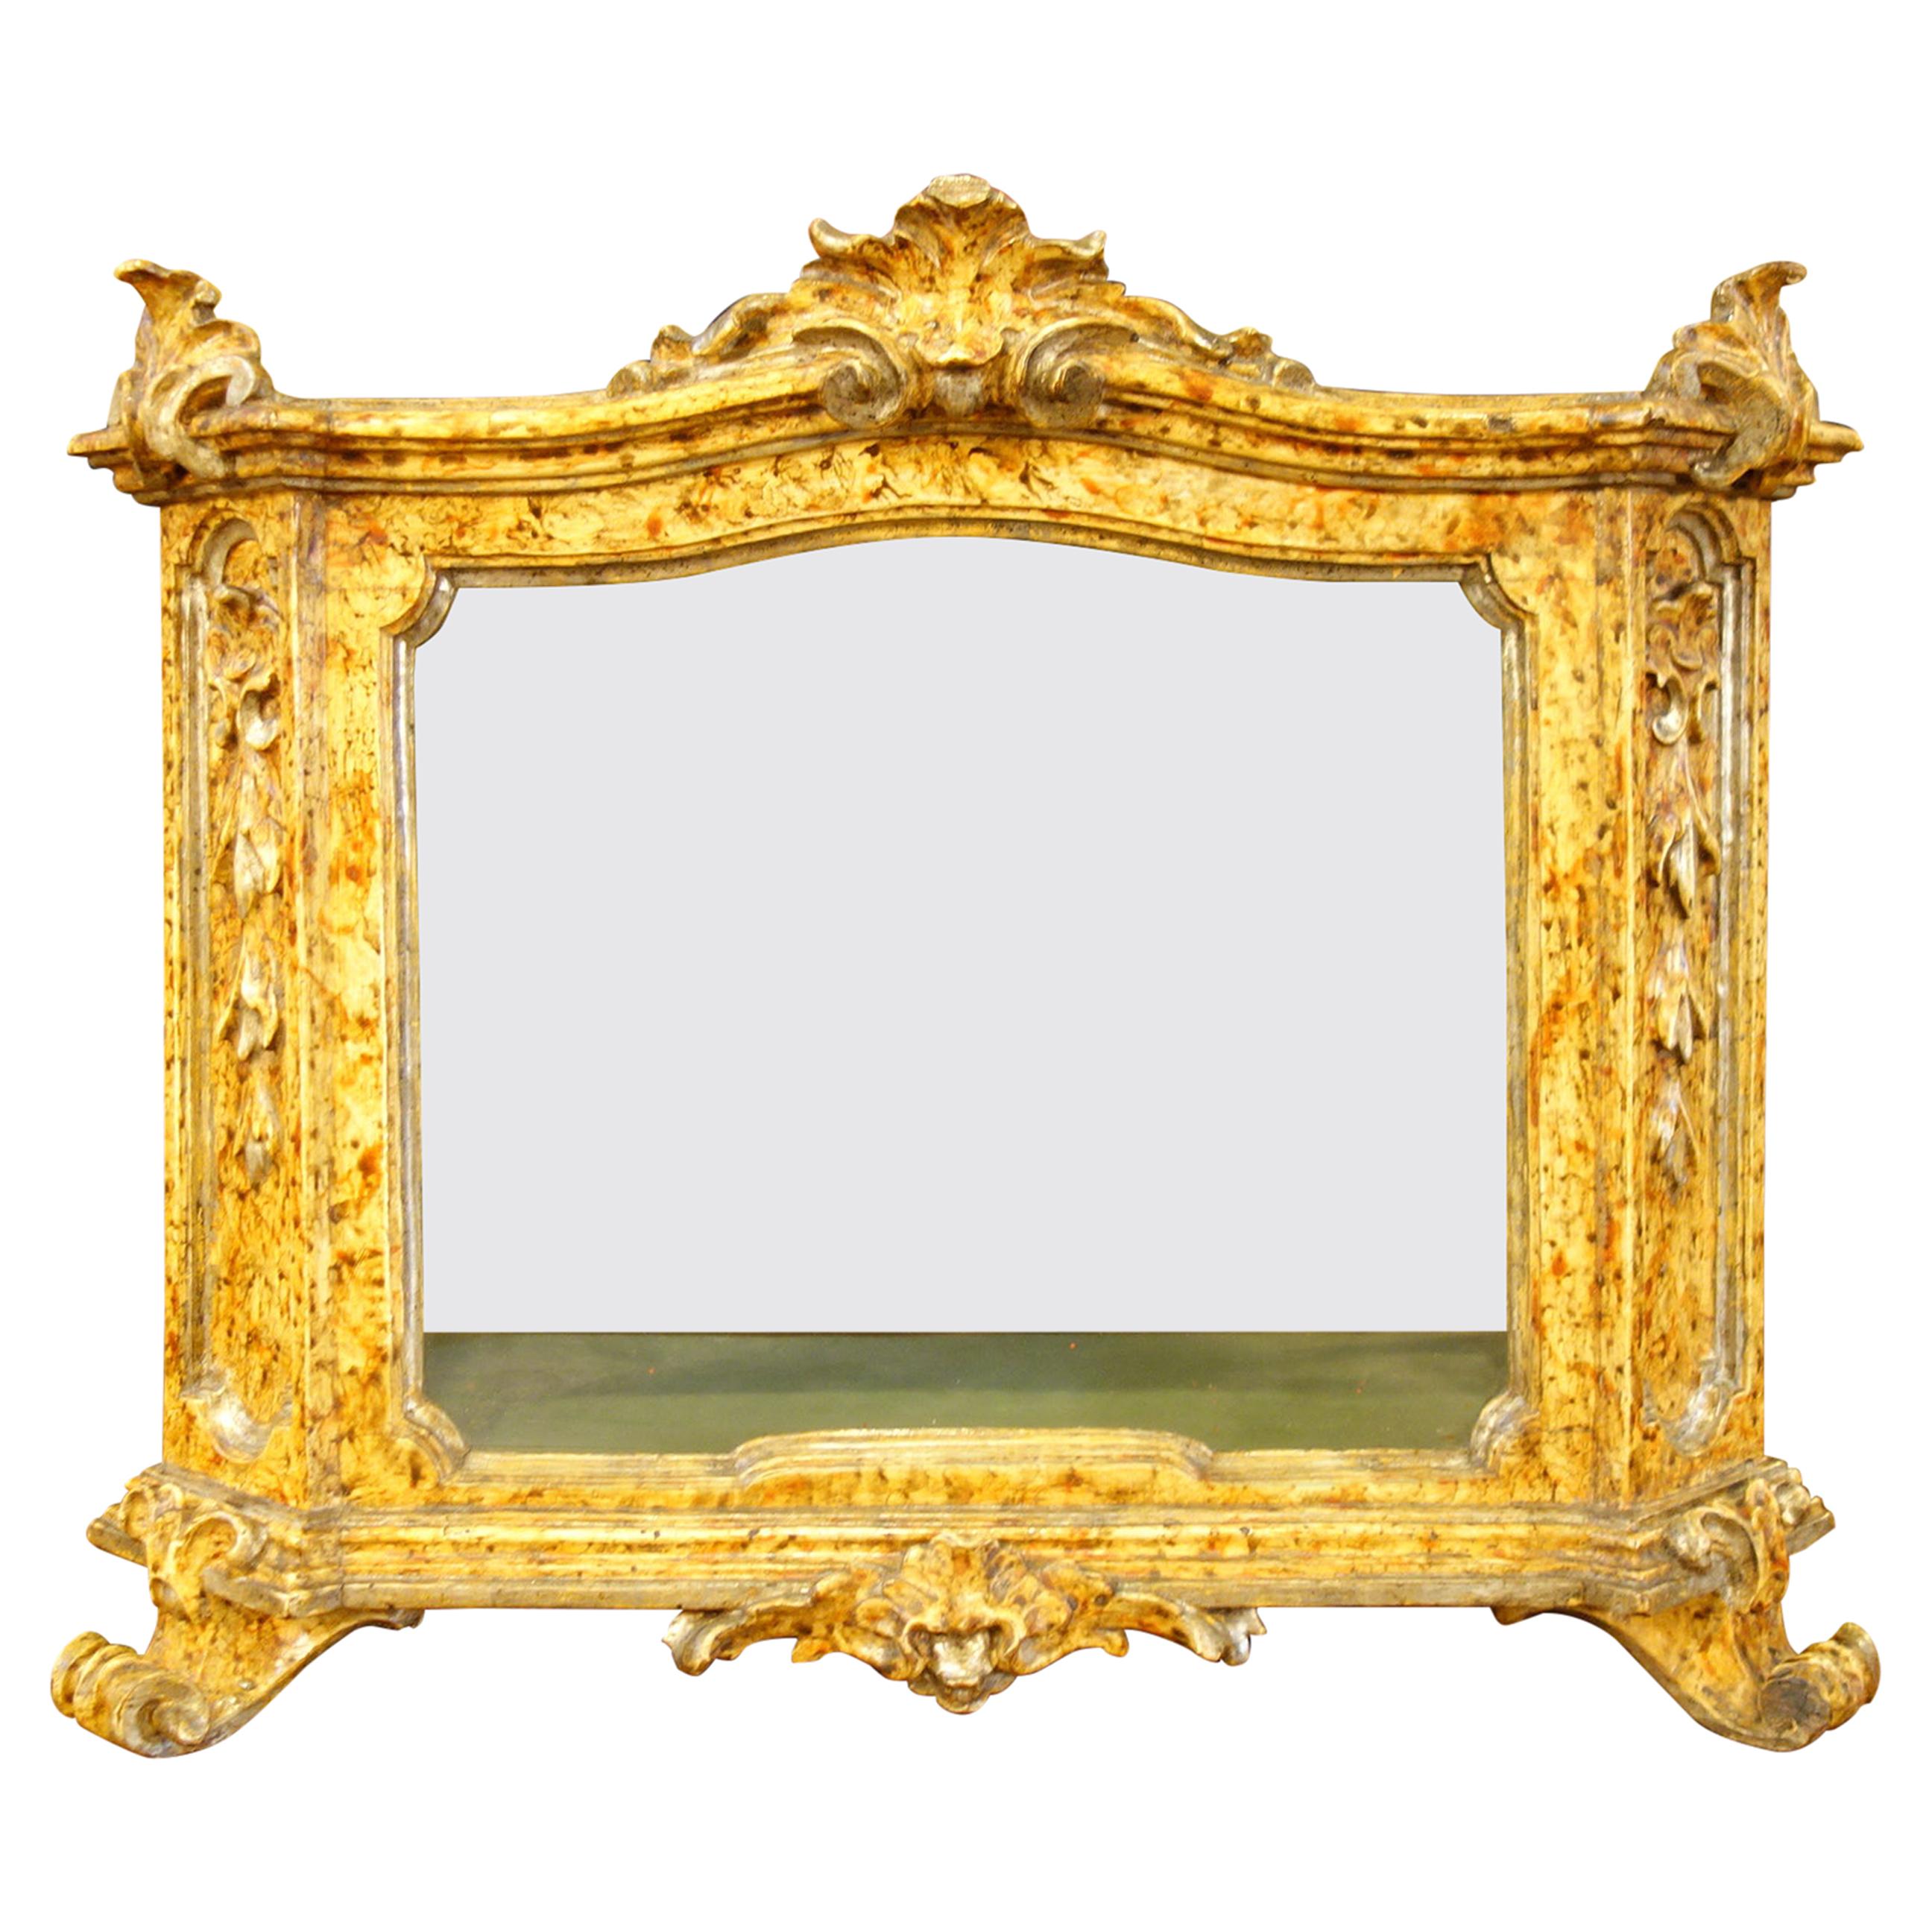 18th Century Louis XV Painted Silver Leaf Display Case Tabernacolo, circa 1770